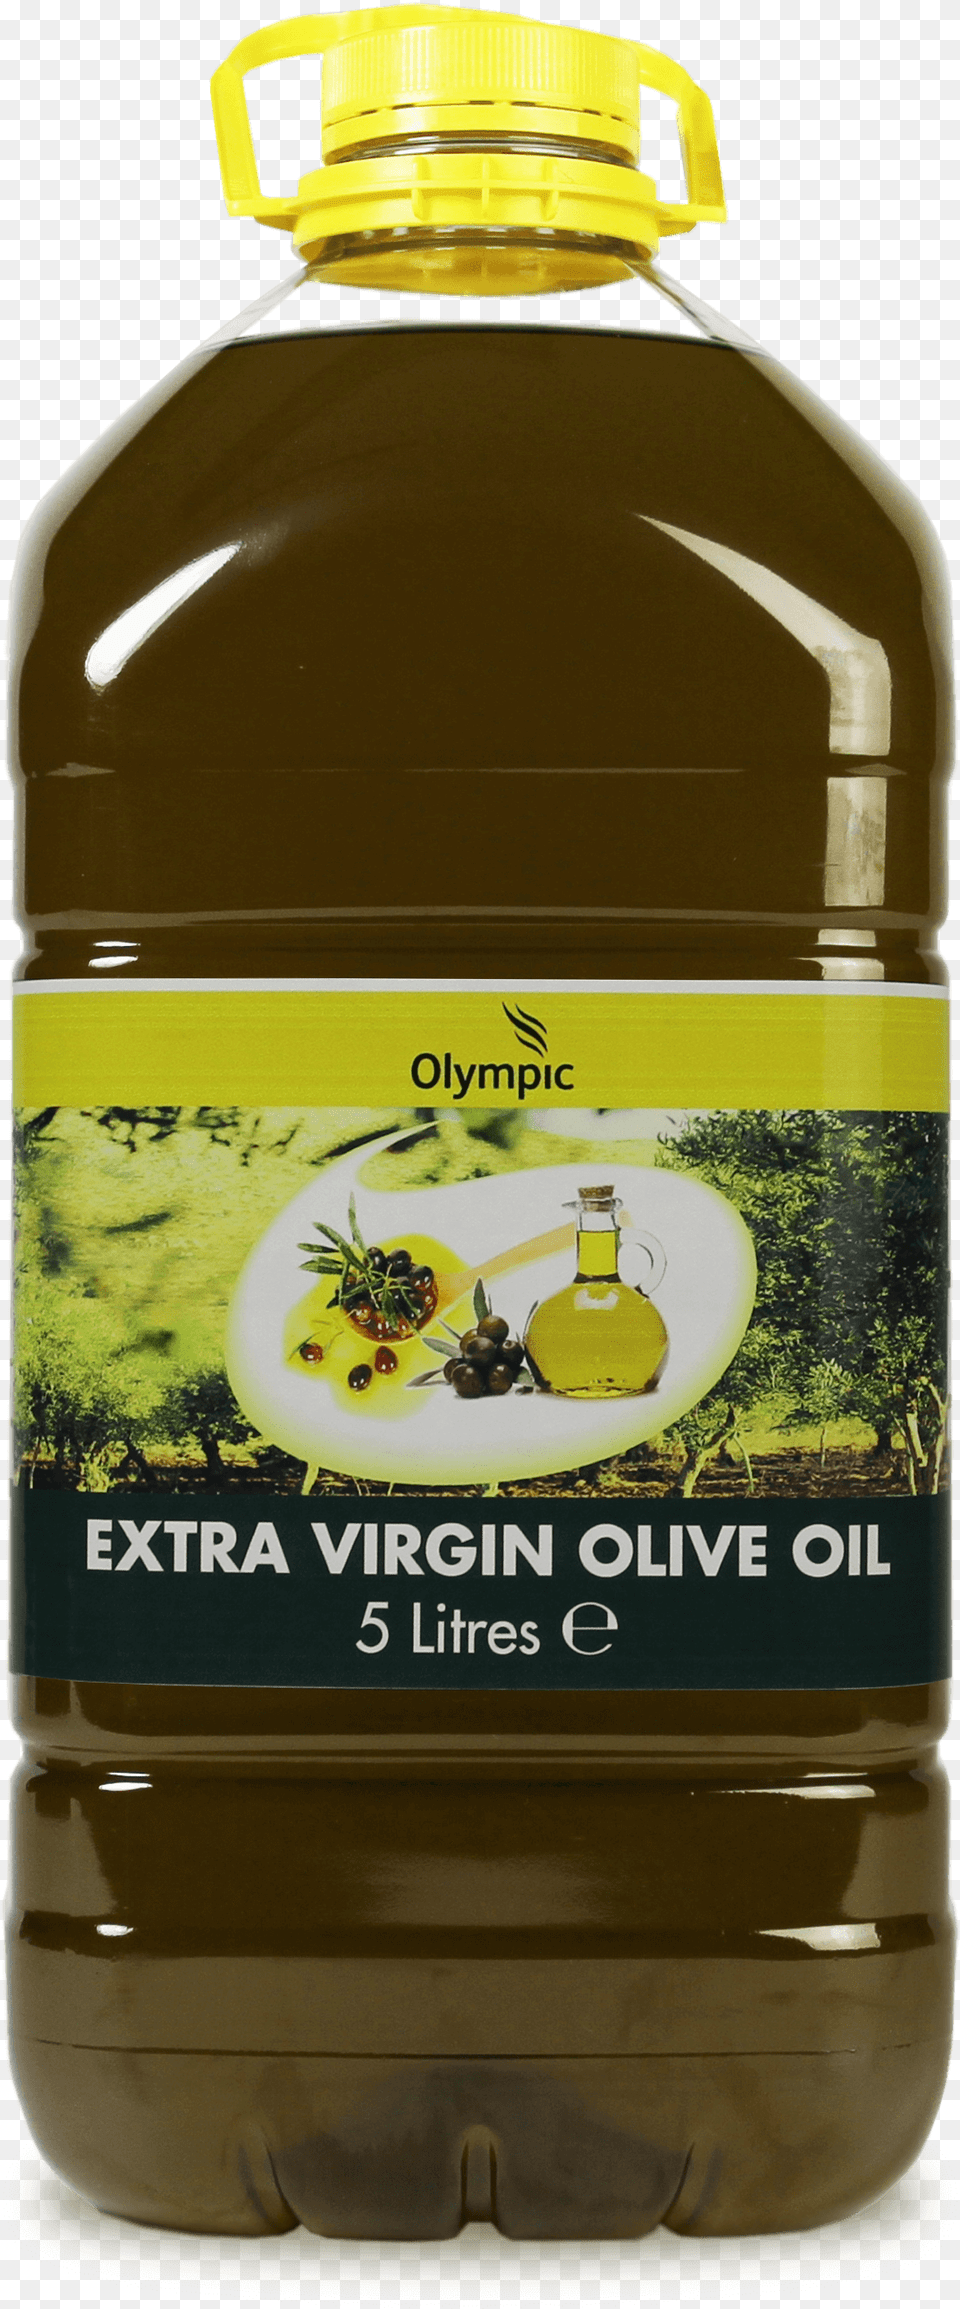 Olympic Extra Virgin Olive Oil 5l Bottle Two Liter Bottle, Cooking Oil, Food, Cosmetics, Perfume Free Png Download